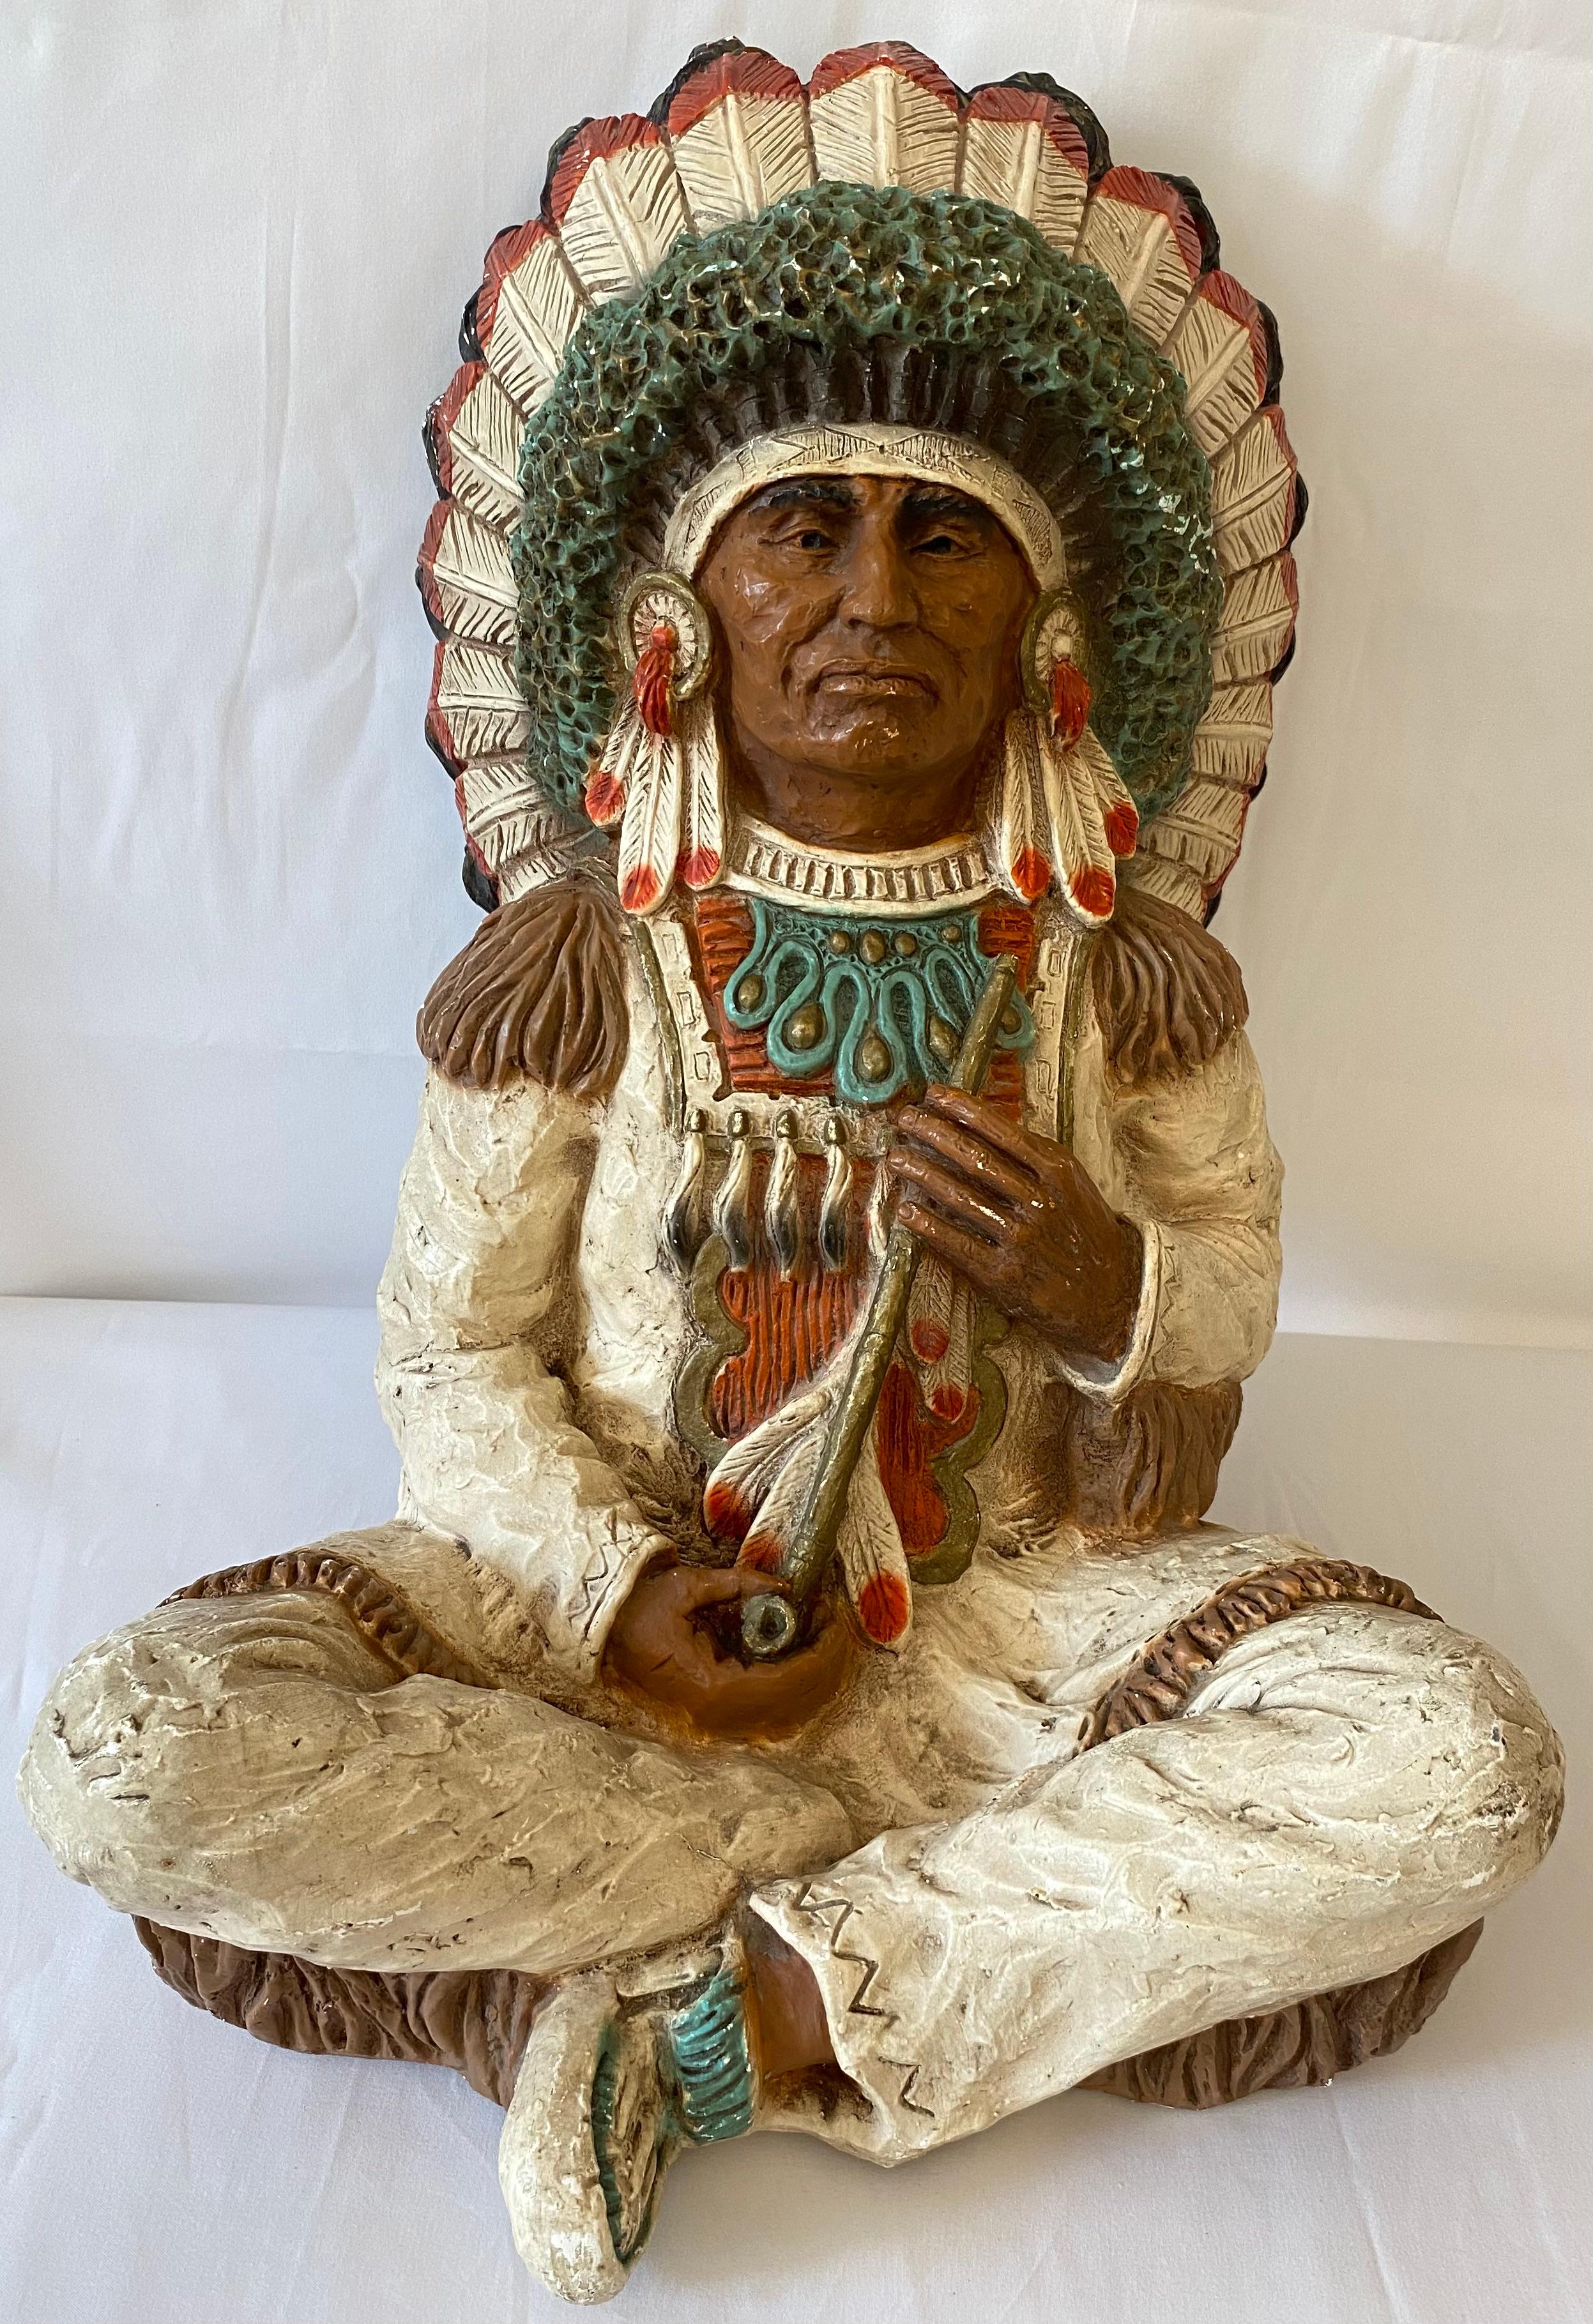 Plaster Large Collectible Native American Indian Chief Sculpture Signed Vaughn Kendrick